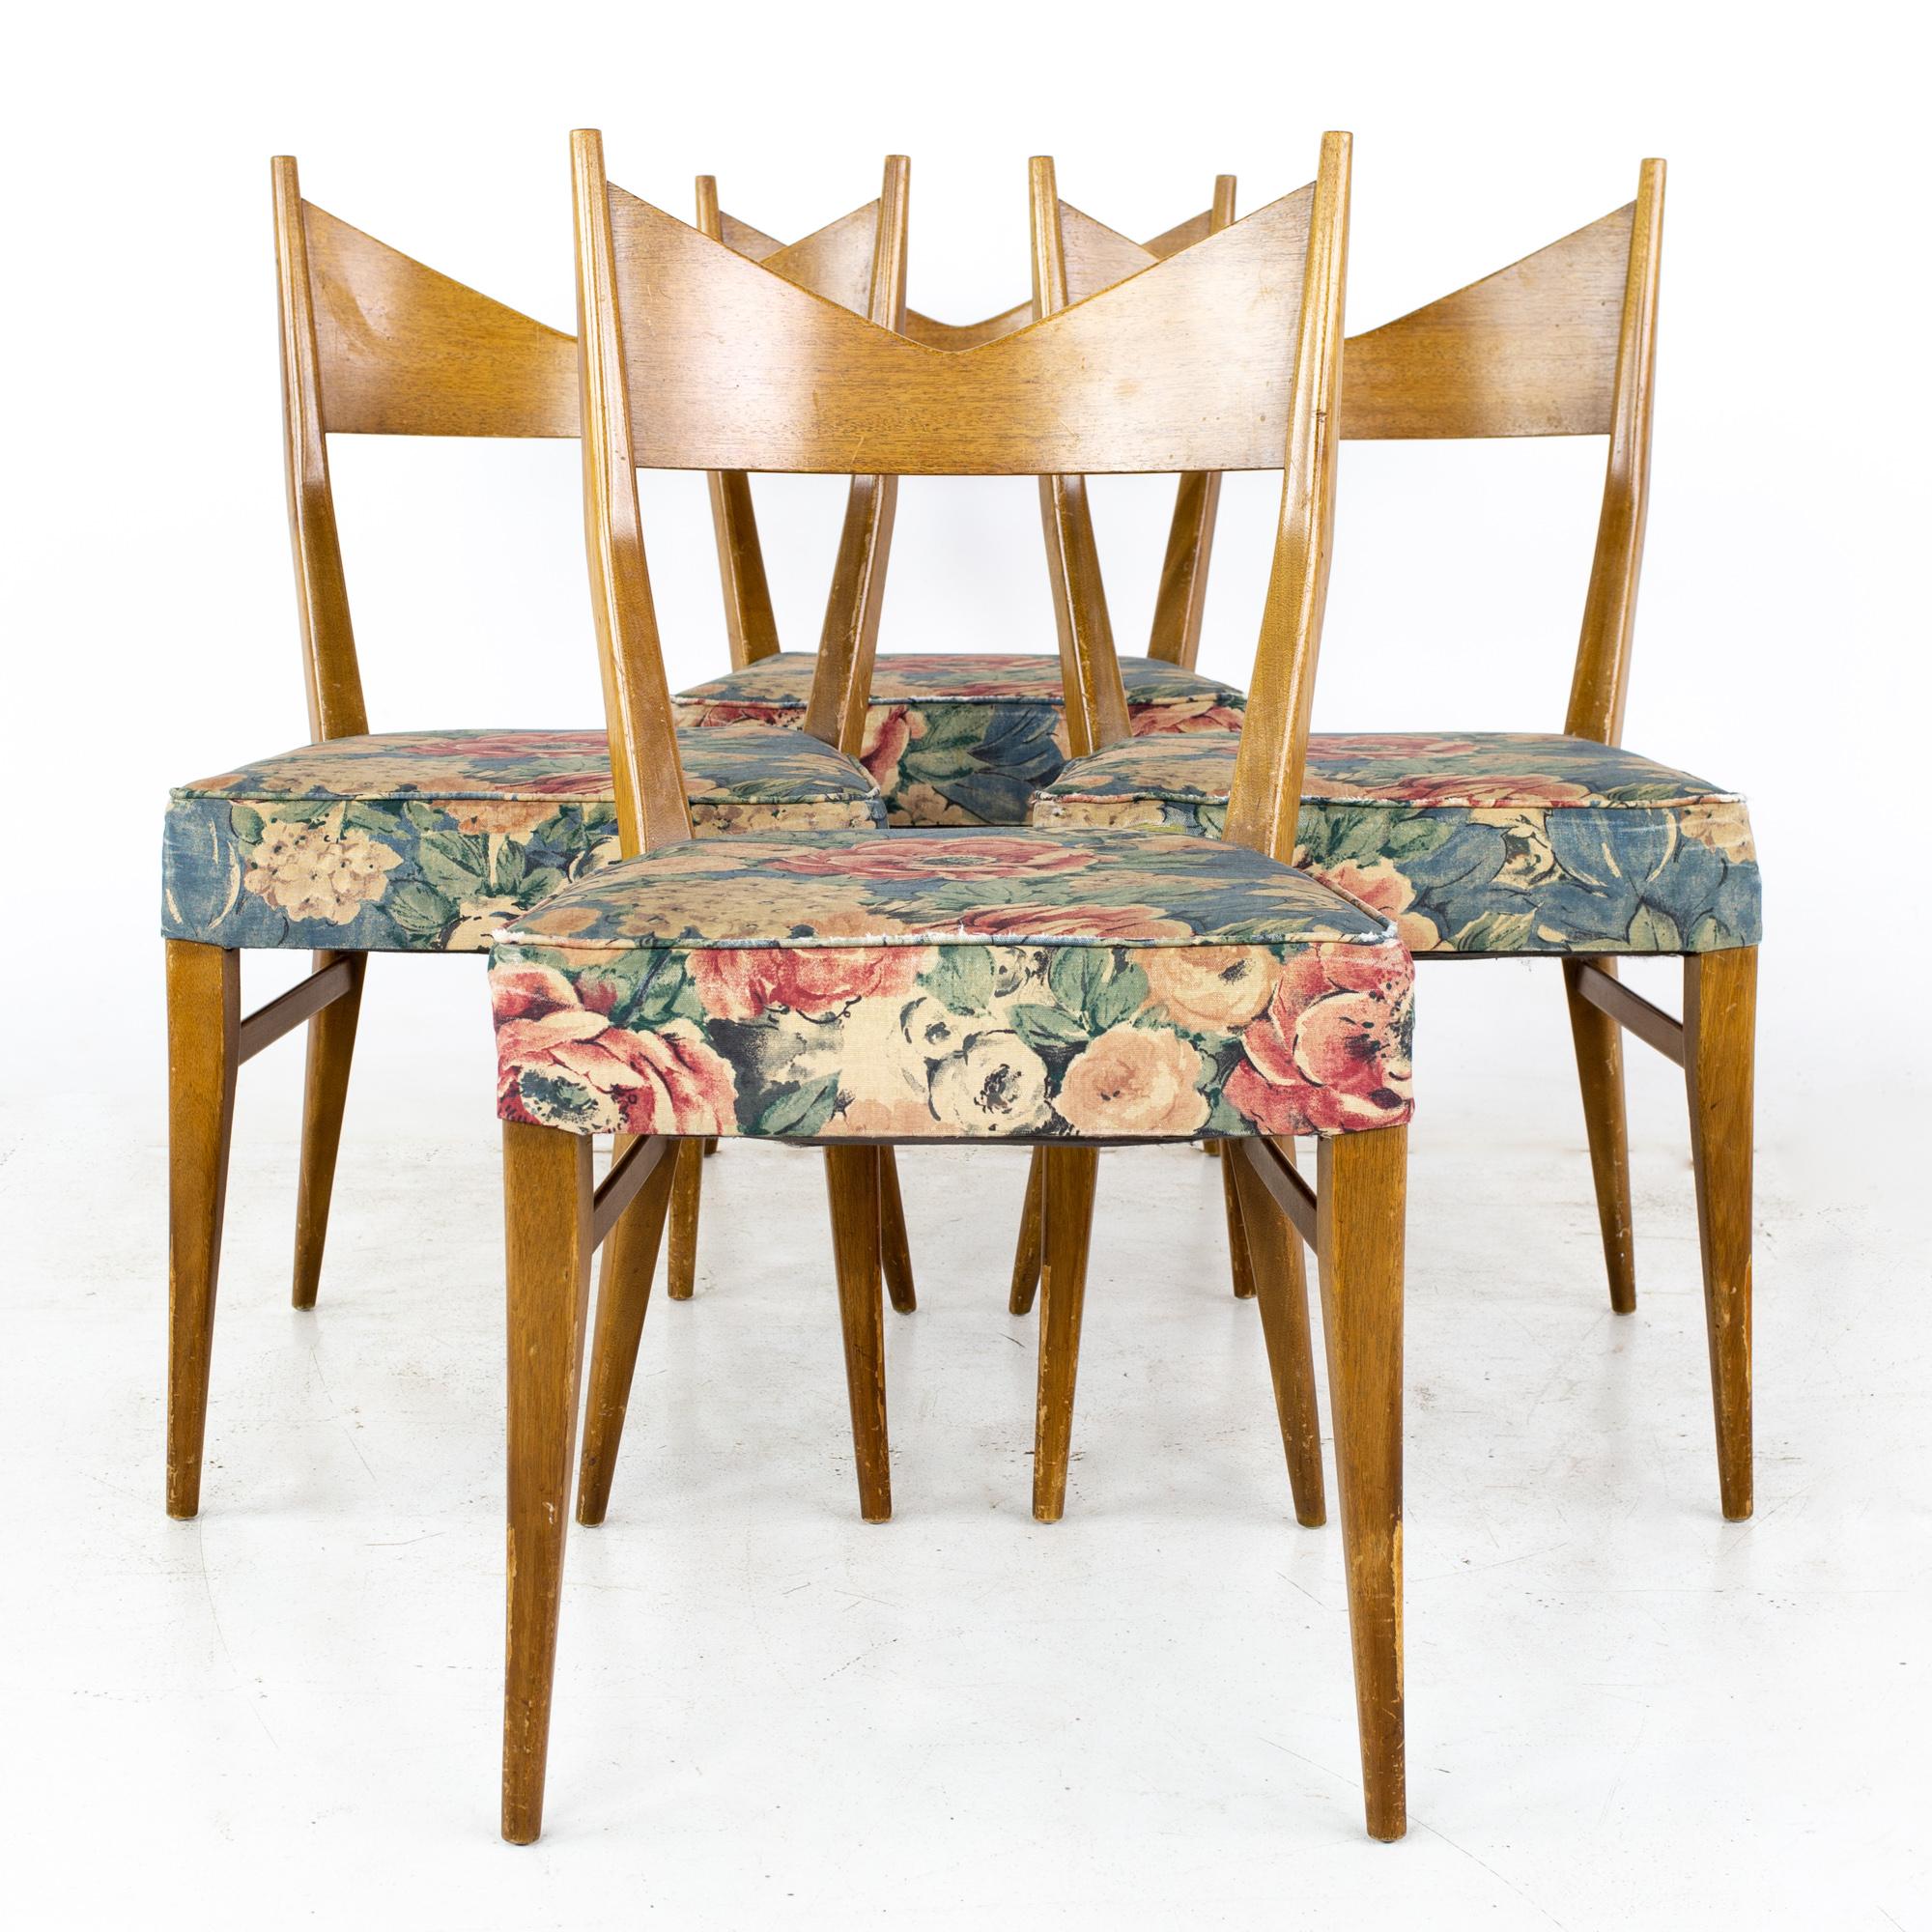 Paul McCobb for Calvin mid century bowtie walnut dining chairs - Set of 4
Each chair measures: 18.5 wide x 19 deep x 34 high, with a seat height of 19 inches and a chair clearance of 19 inches

All pieces of furniture can be had in what we call